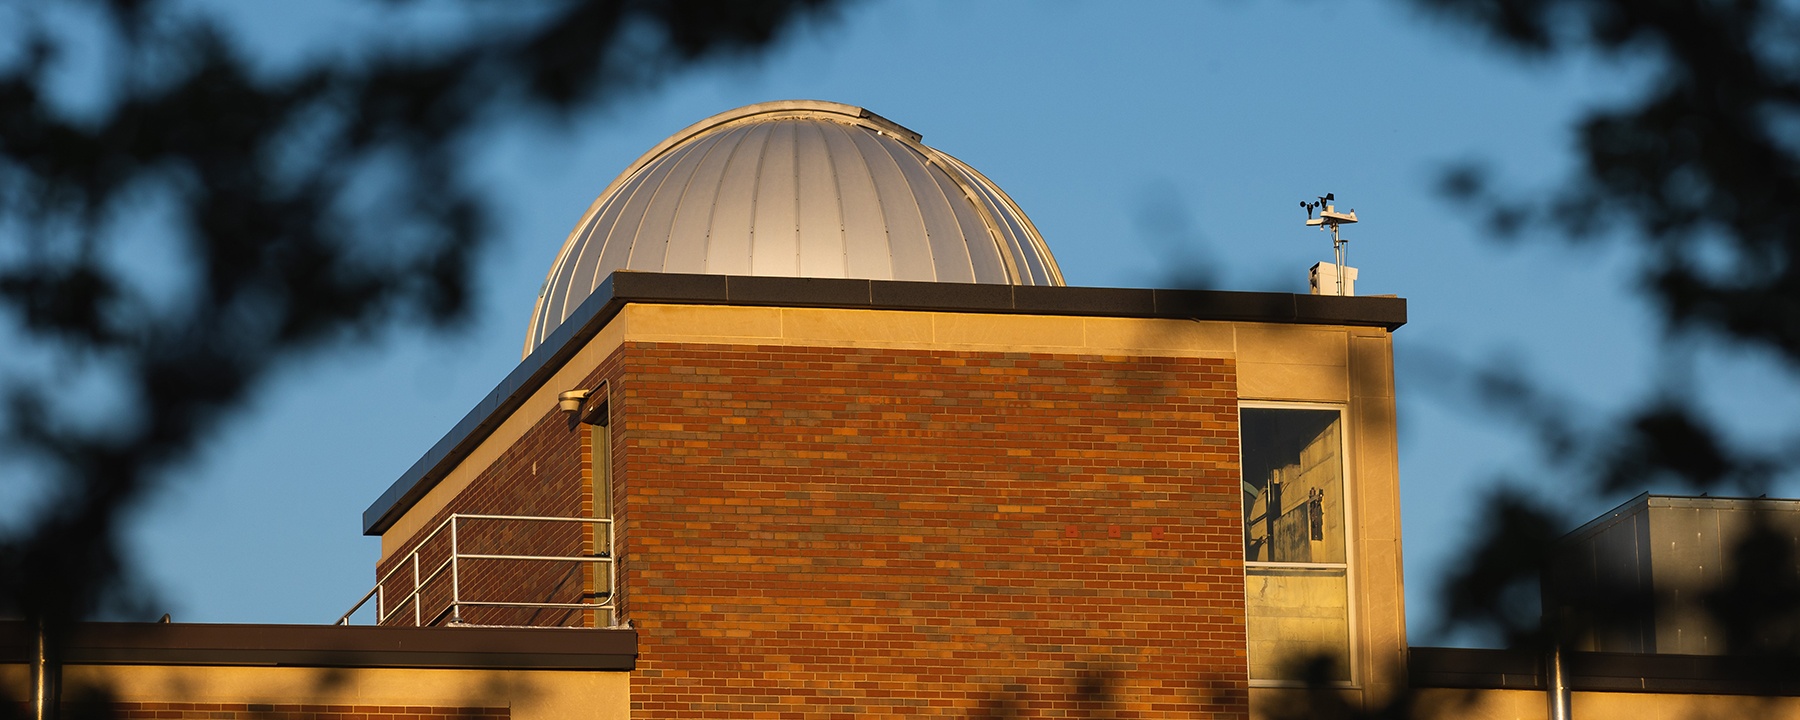 A distant view of Brooks Hall Astronomical Observatory during the daytime.